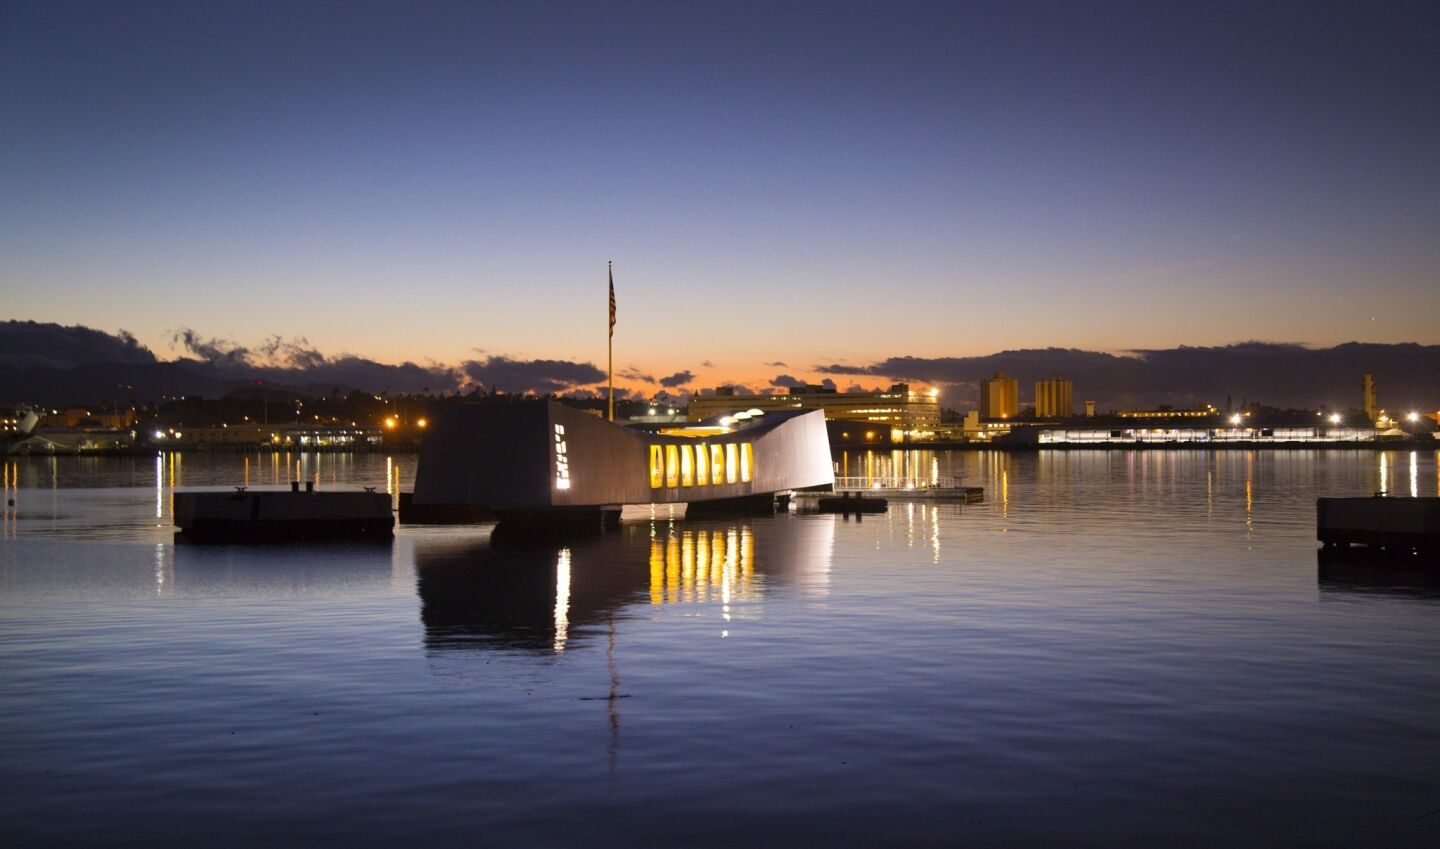 The sun prepares to rise behind the battleship USS Arizona Memorial at Pearl Harbor, Hawaii, as commemorations continue leading up to Wednesday, and the 75th anniversary of the Japanese attack on Pearl Harbor, December 7, 1941, thrusting The United States into World War II.